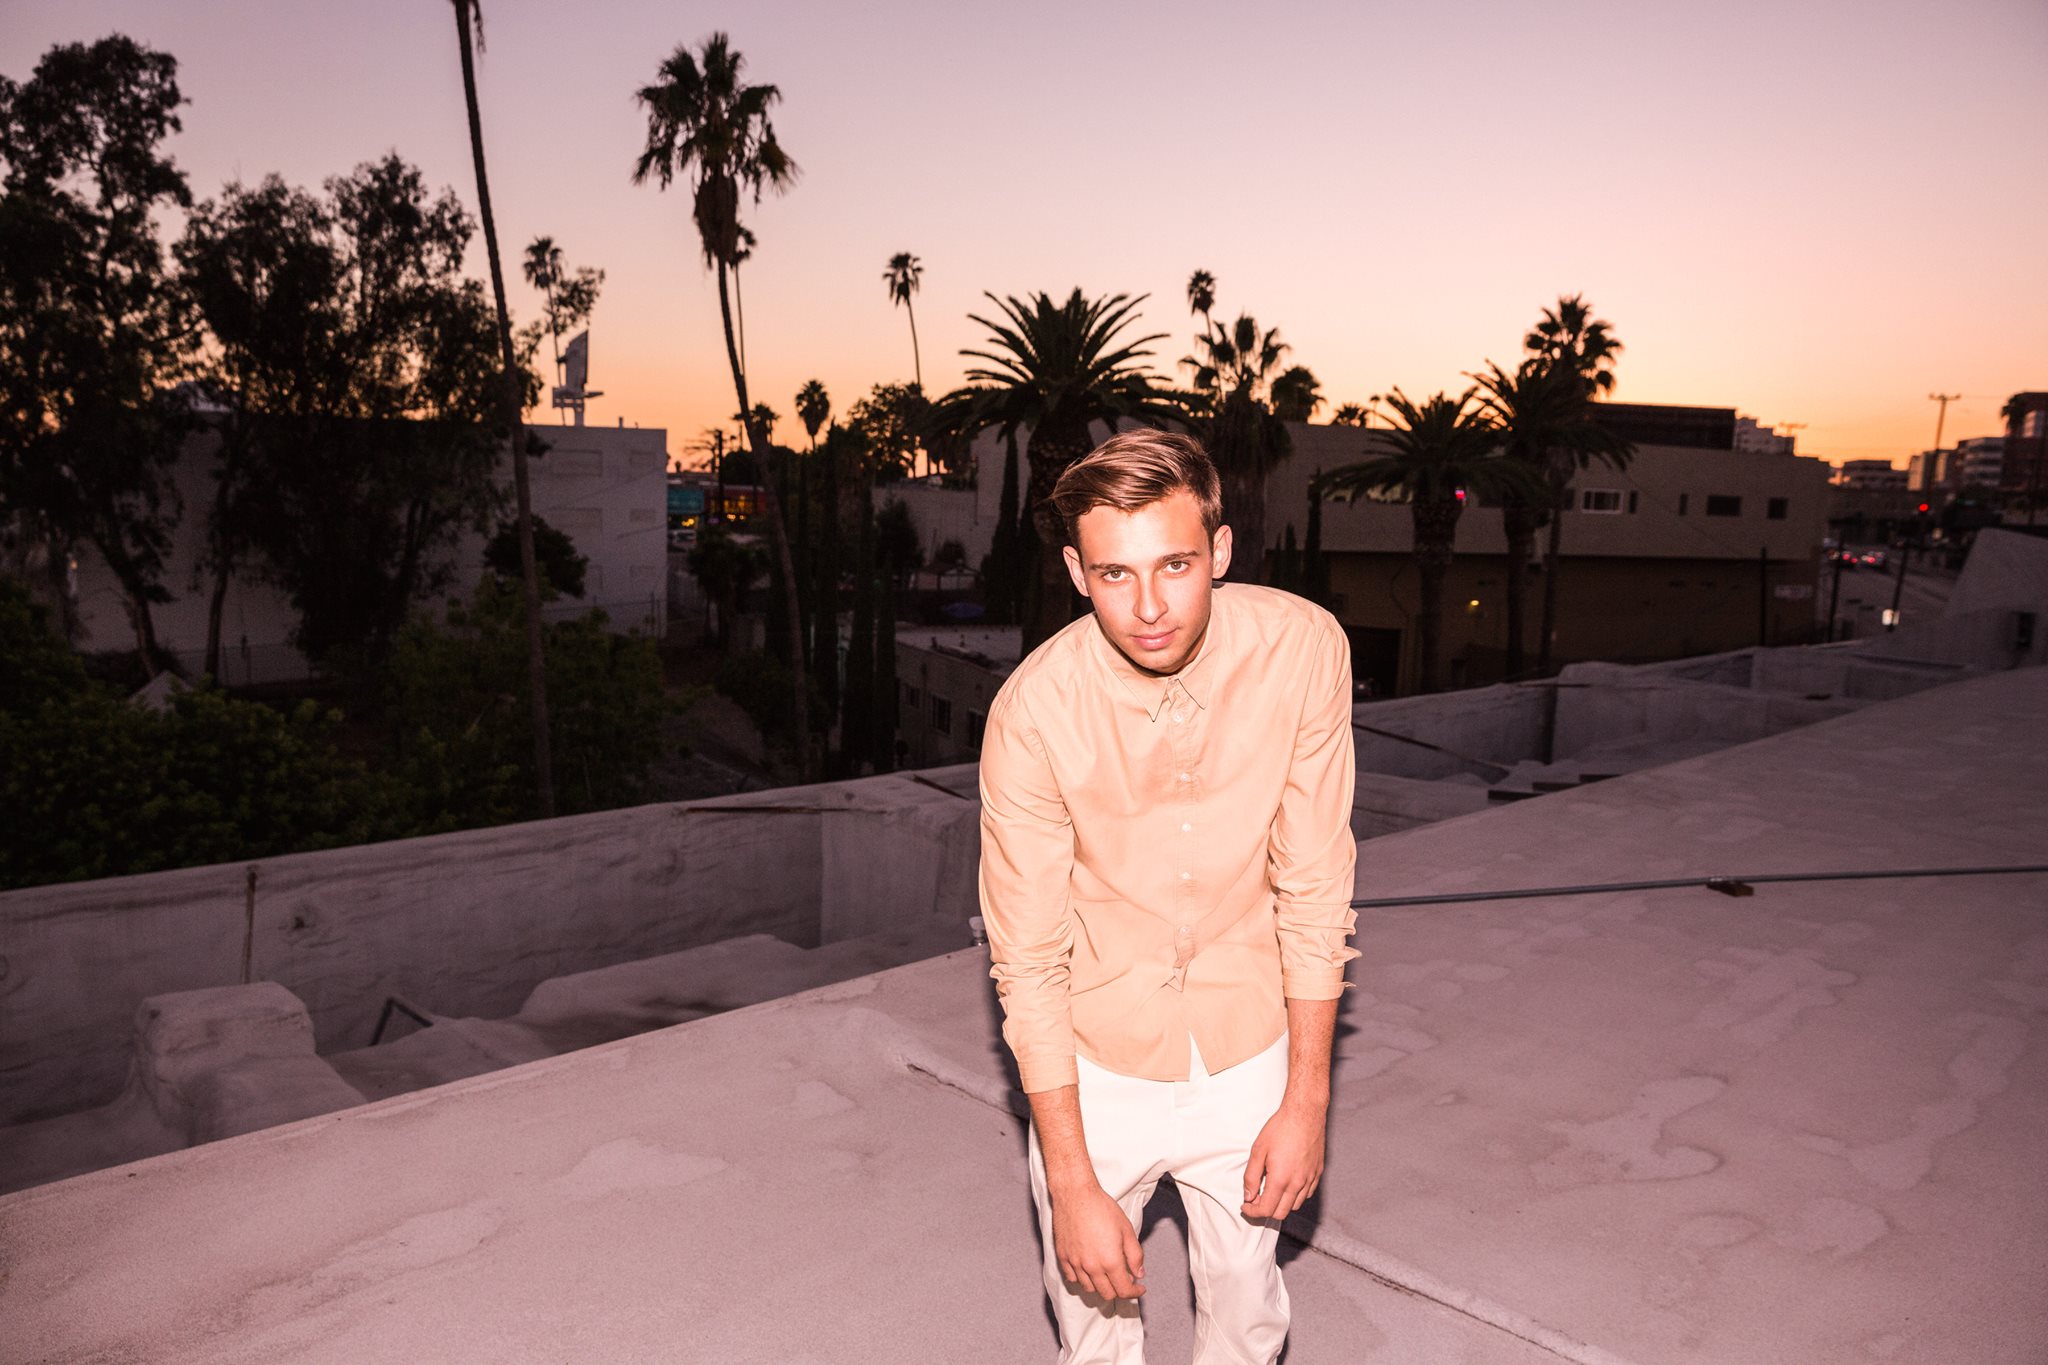 Courtesy of Flume's Facebook page